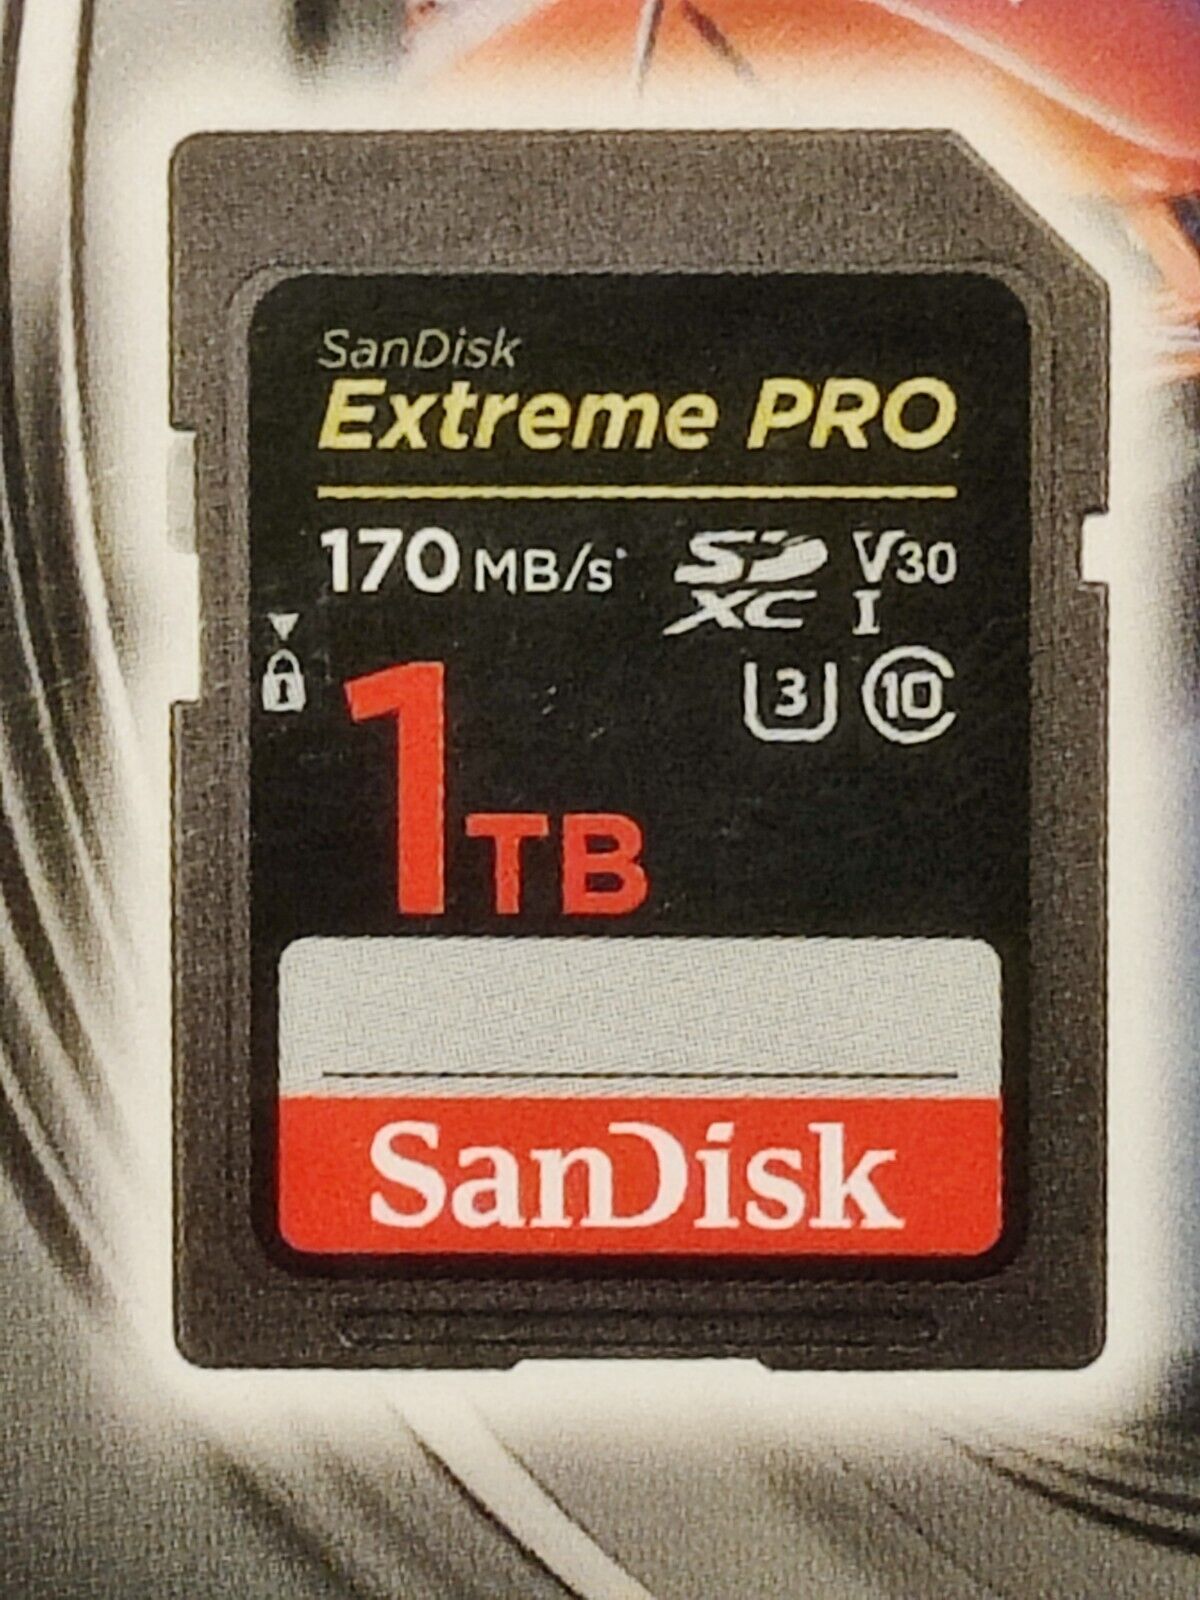 SanDisk Extreme Pro 1TB SD Class 10 SDXC Memory Card - SDSDXXY 